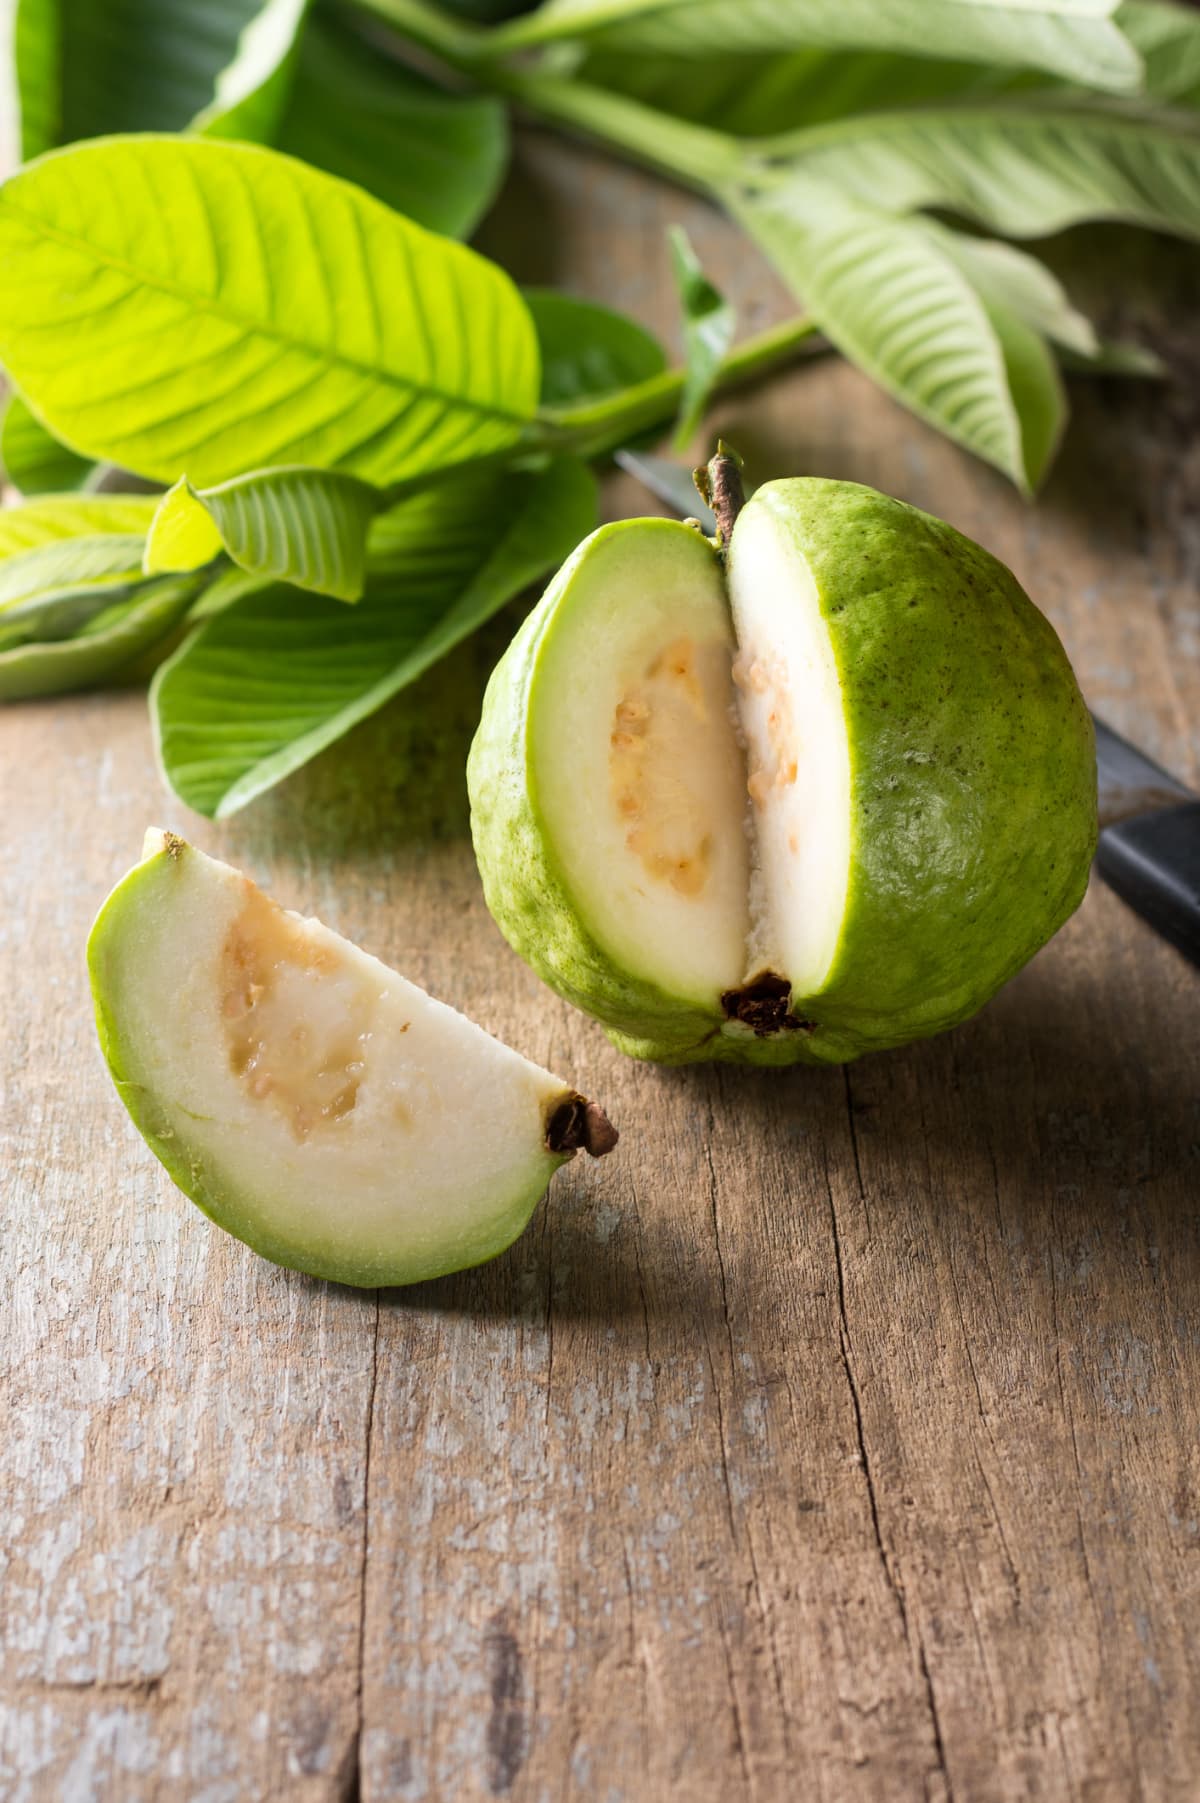 guava fruit sliced on wood table top with leaves in the background, common tropical fruit with yellowish green skin and packed with nutrients, copy space